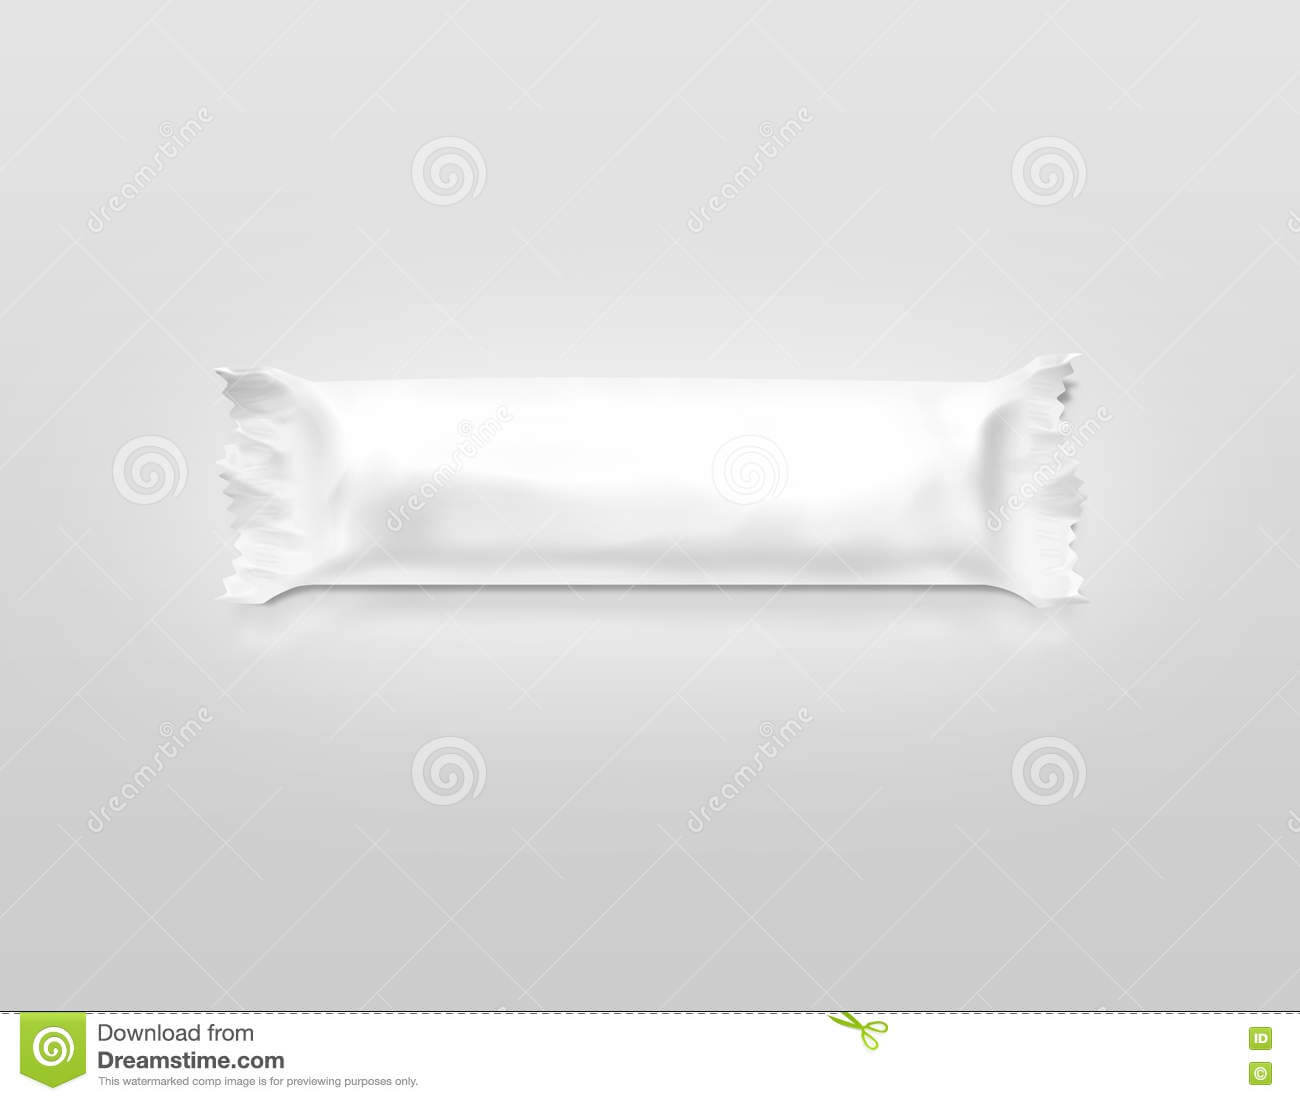 Blank White Candy Bar Plastic Wrap Mockup . Stock Photo With Blank Candy Bar Wrapper Template